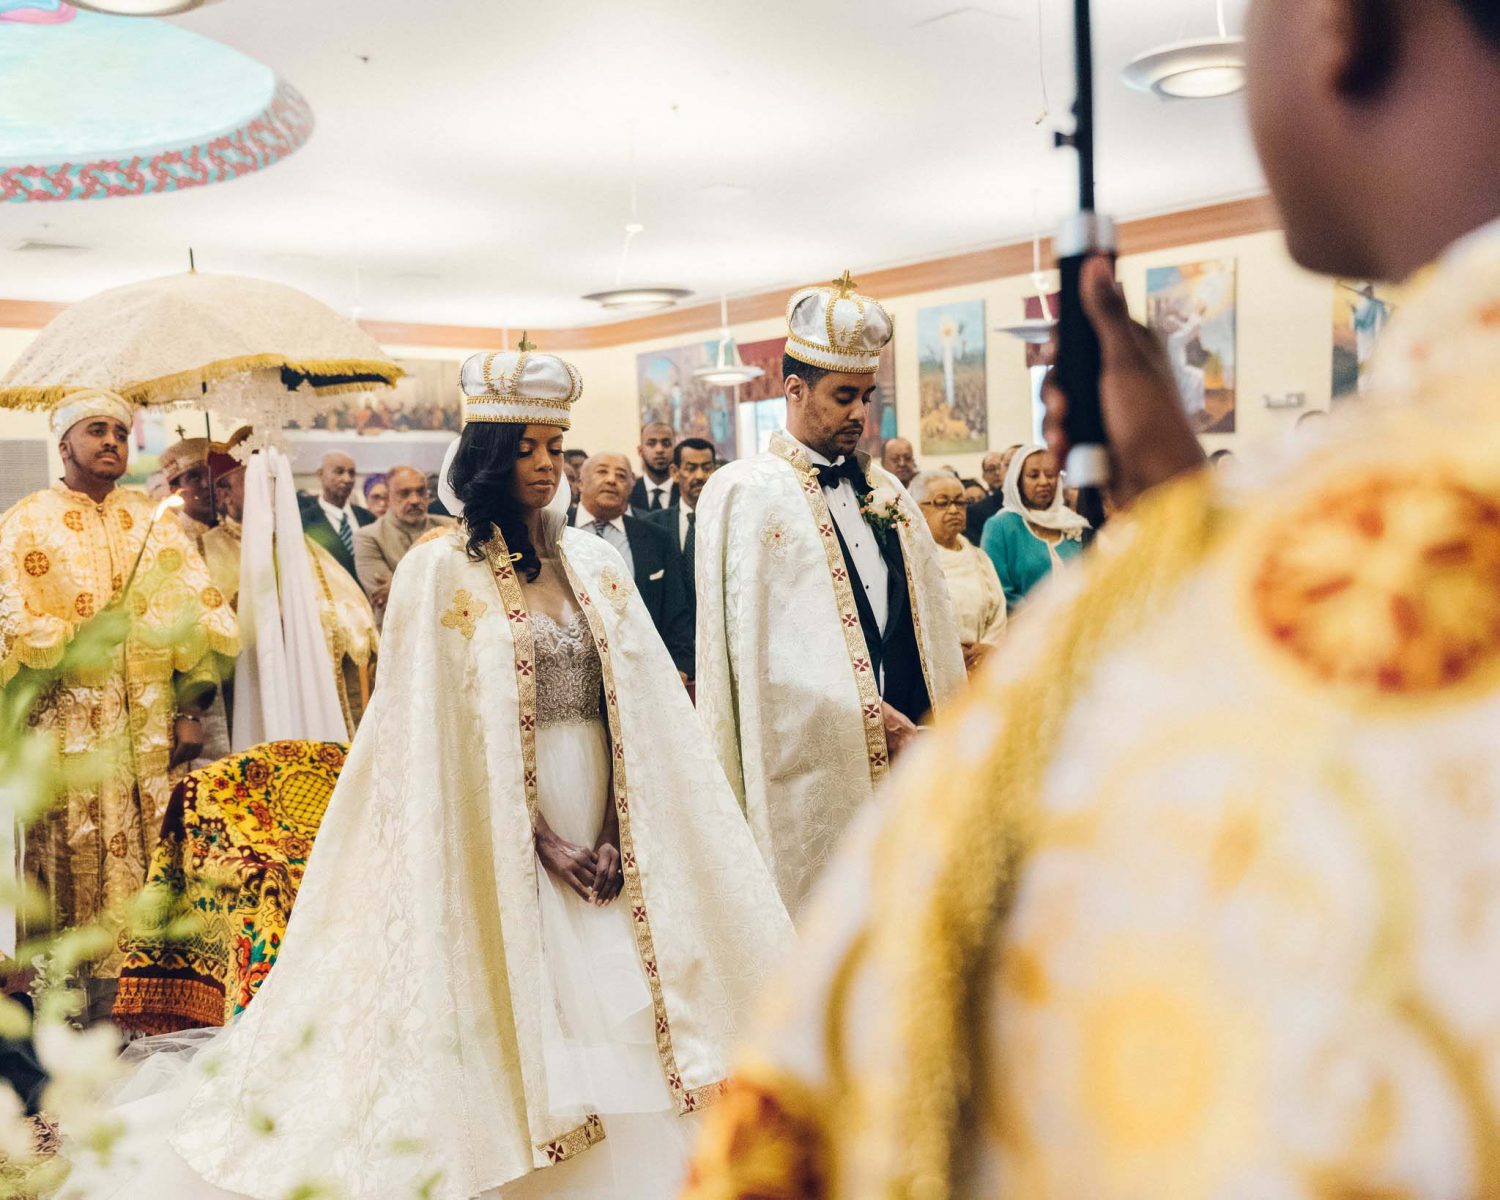 Ariana Austin and Joel Makonnen were married on Sept. 9 in a lavish ceremony in Temple Hills, Md. Mr. Makonnen is the great-grandson of Haile Selassie, the last emperor of Ethiopia. (New York Times photo)